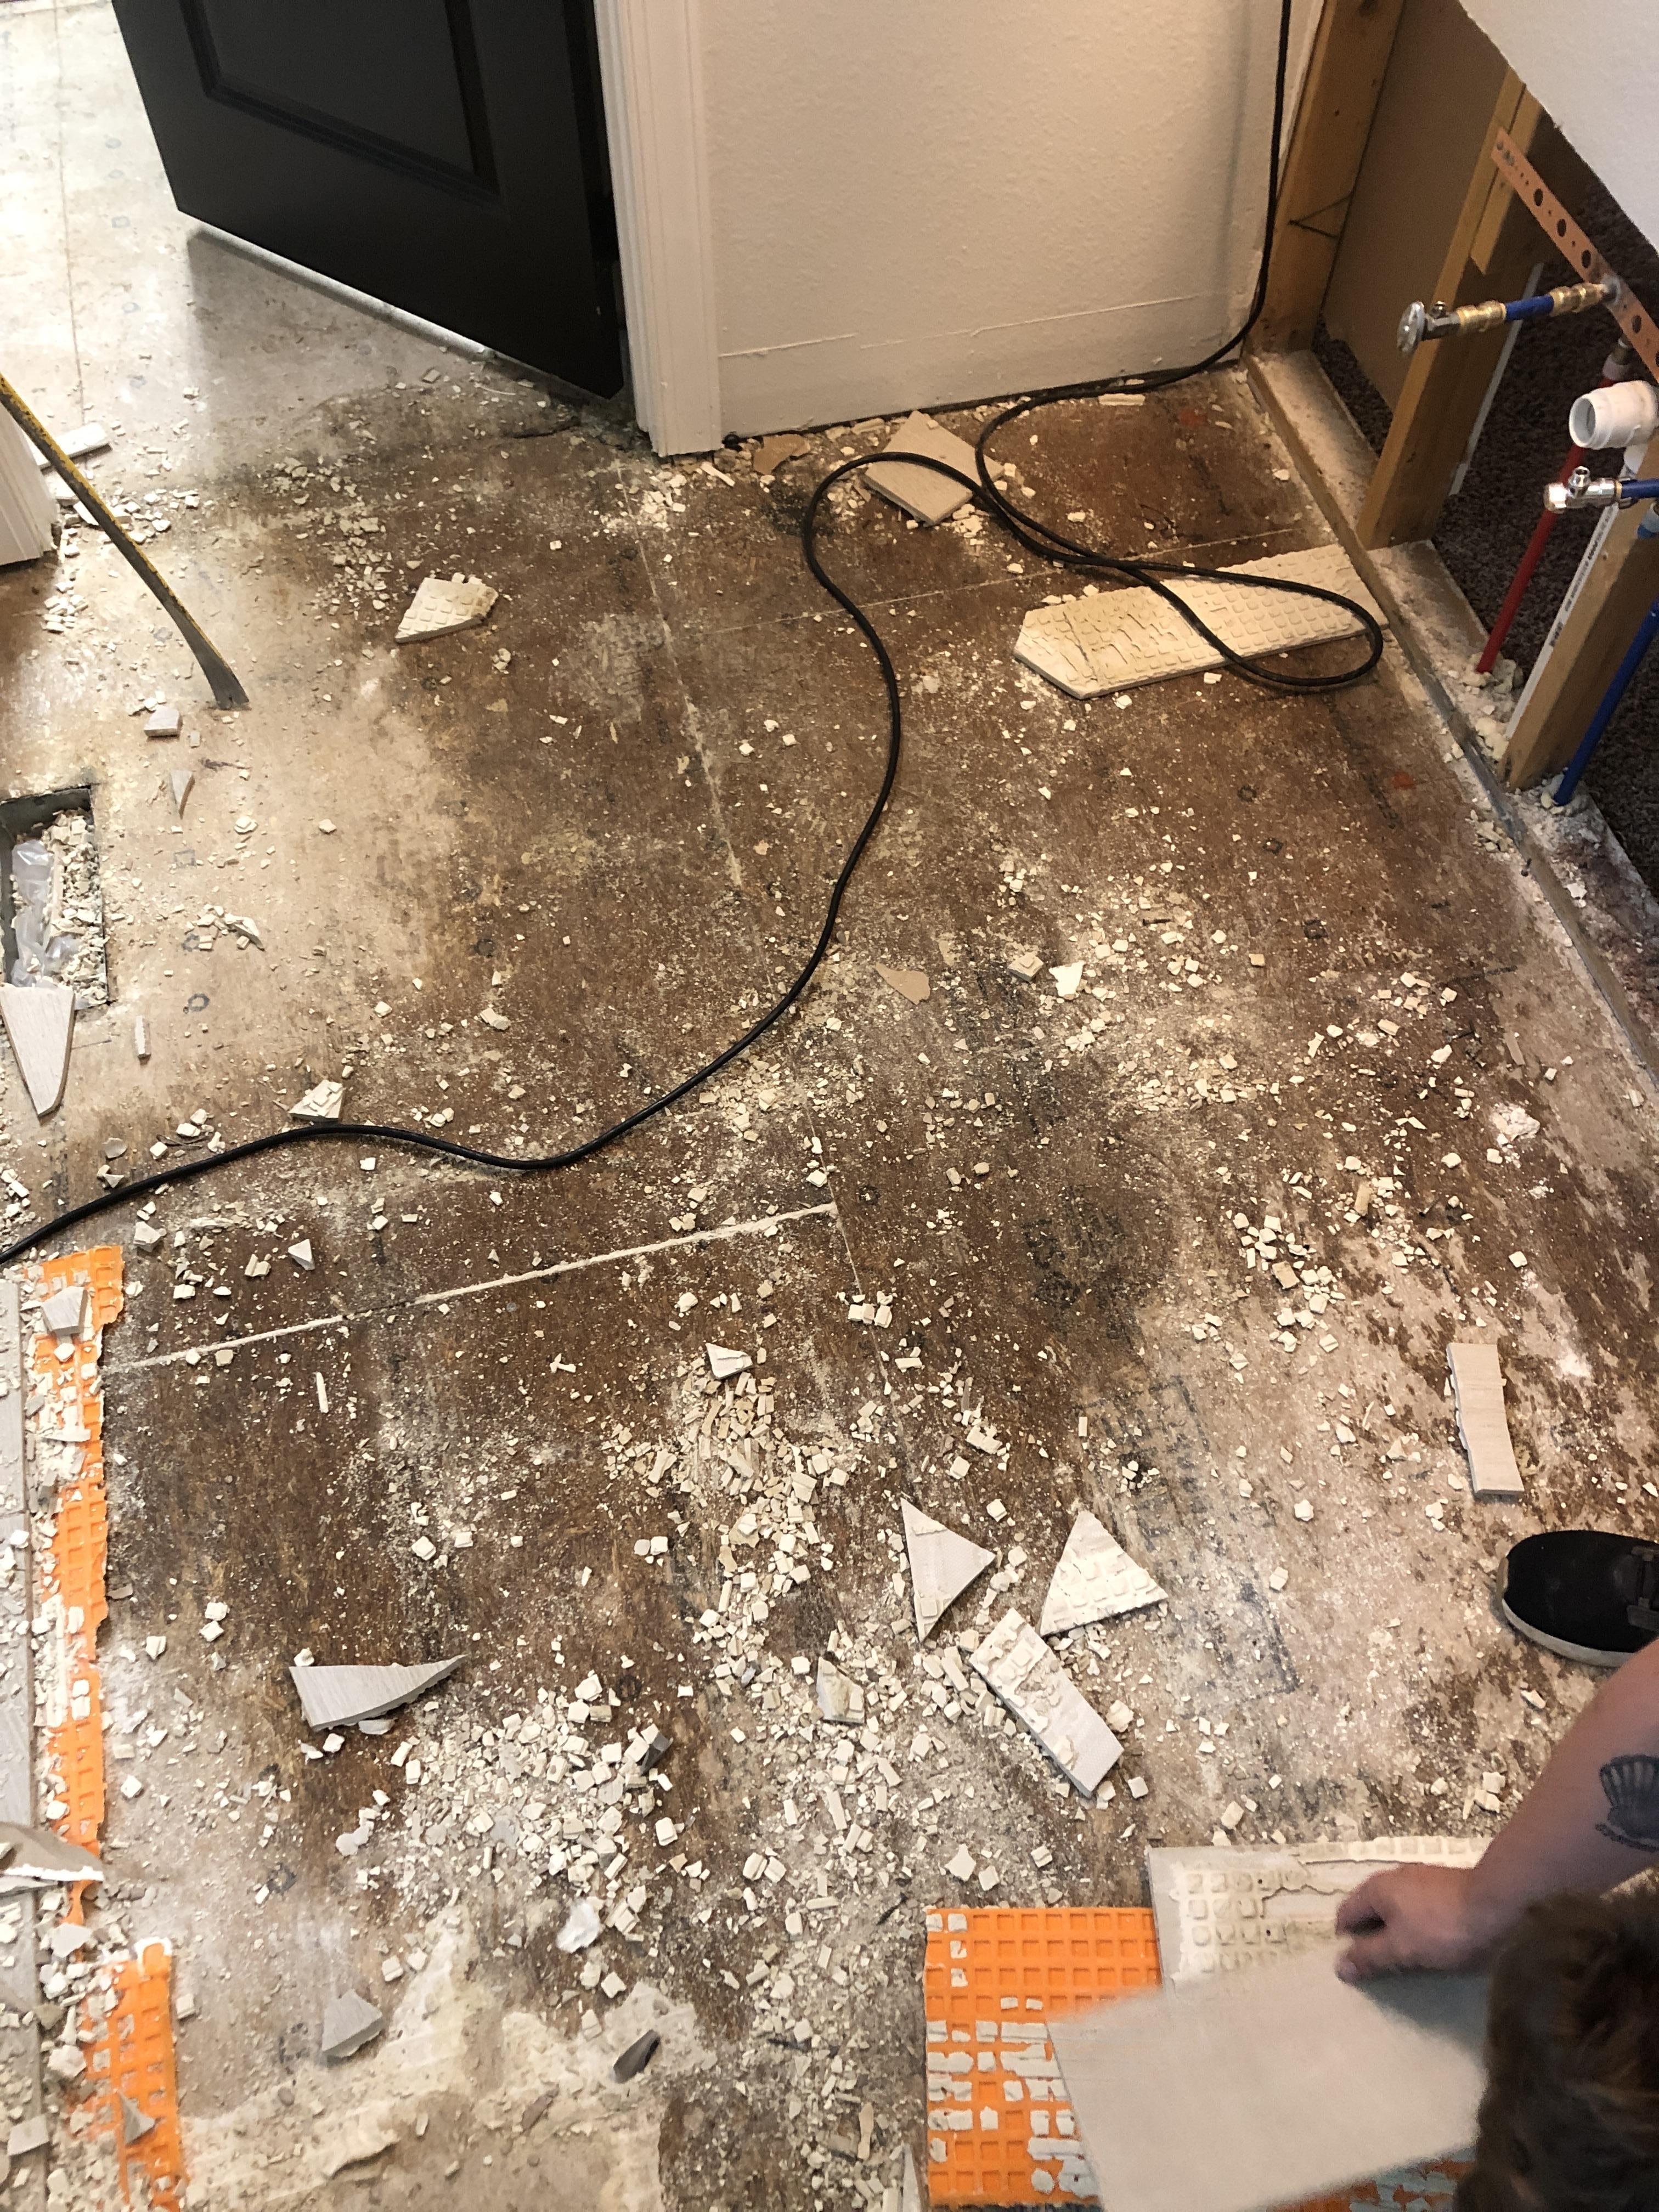 Removed flooring in the bathroom